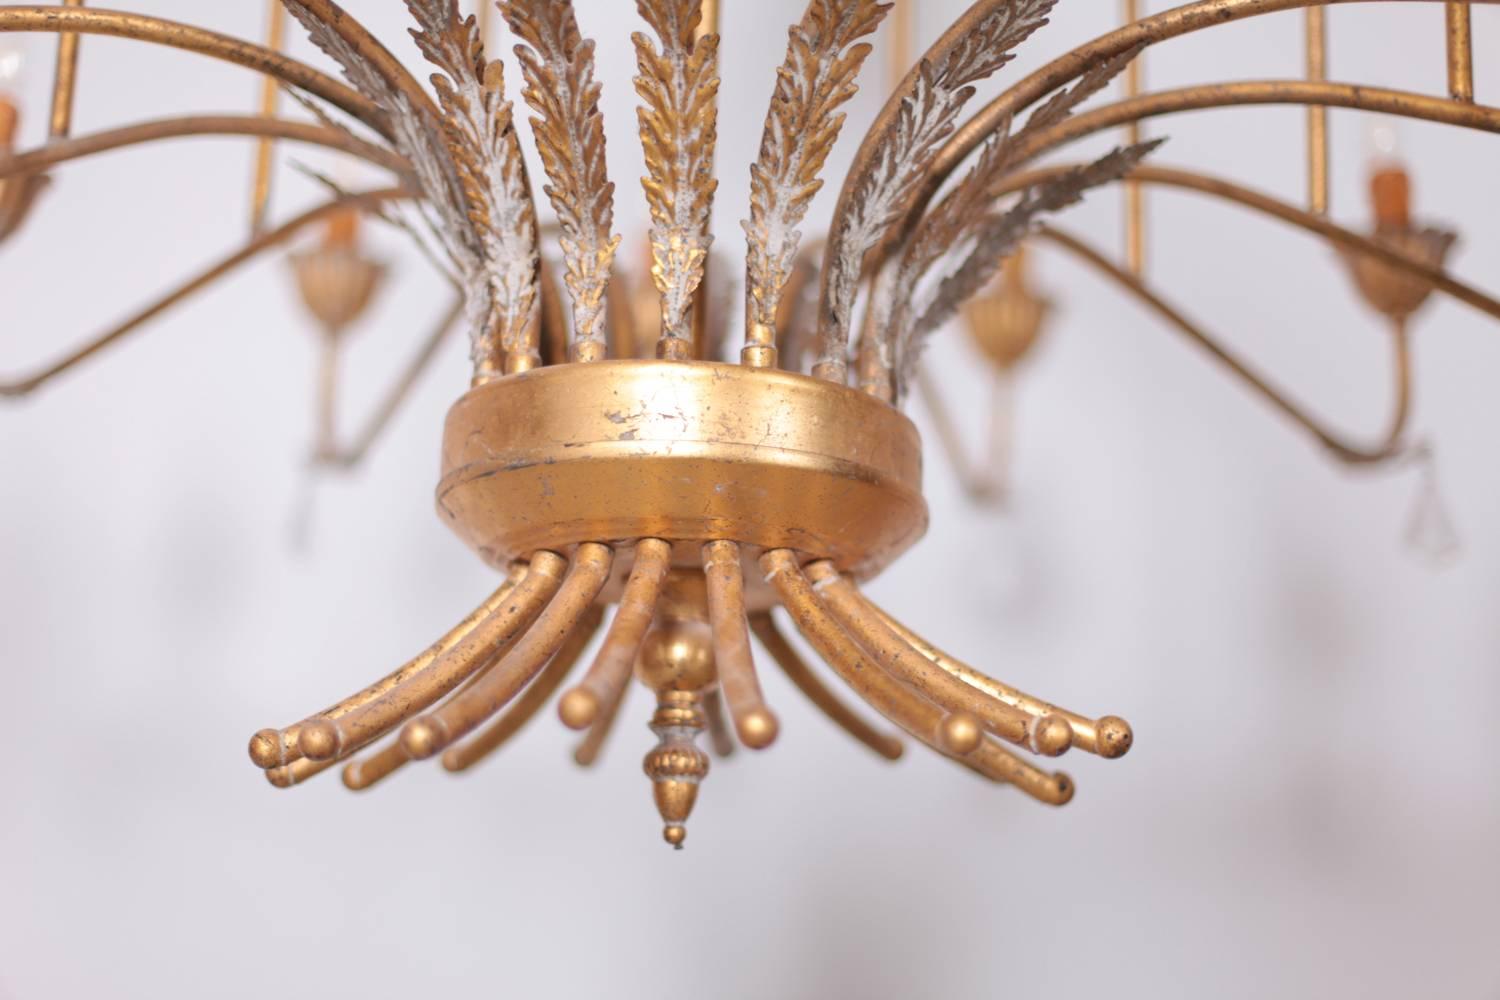 Extraordinary huge chandelier from a villa in France. The chandelier is manufactures in high quality and is a real eyecatcher for every house. Very hard to find in such a size. The chandelier is complete and shows only some bindings at the very